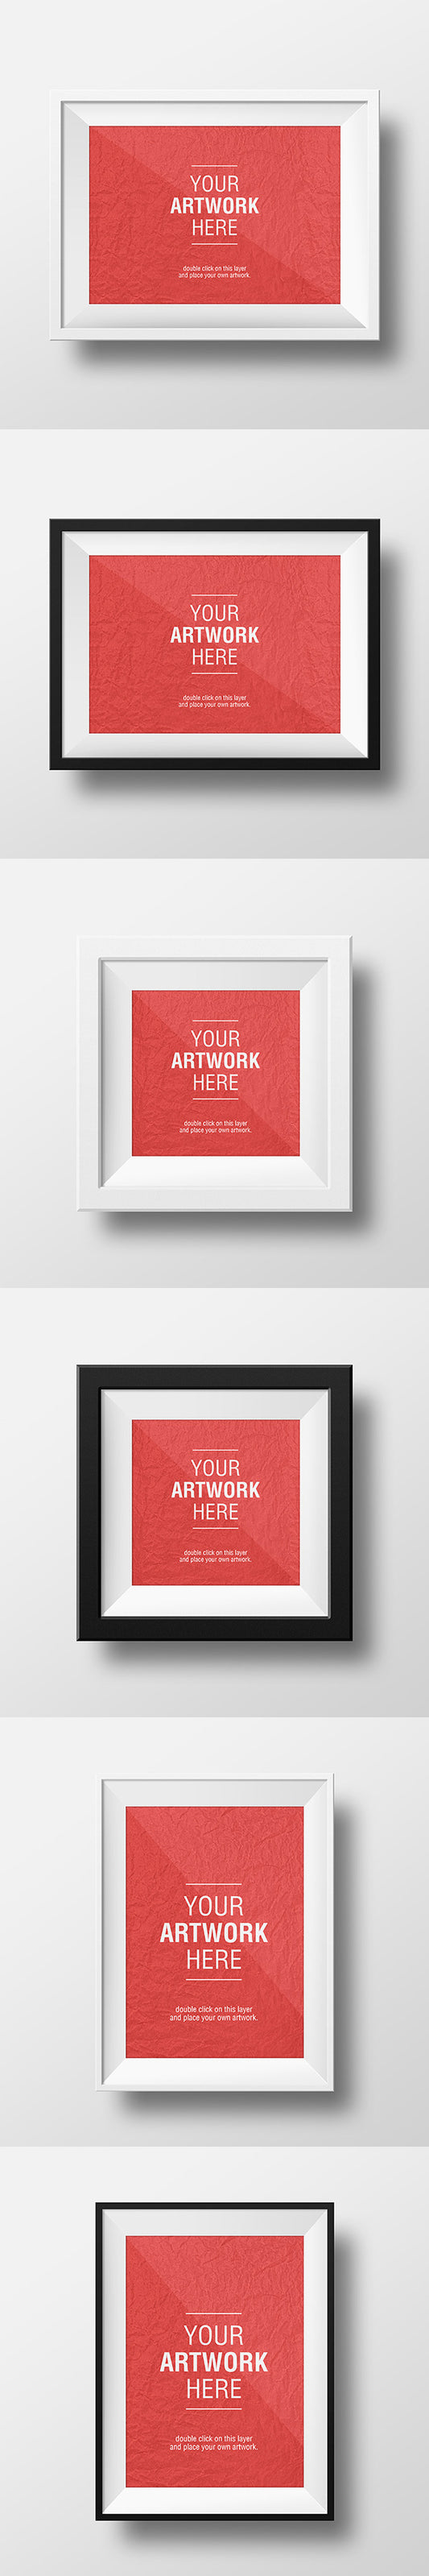 Free Clean White Empty Frame PSD MockUps